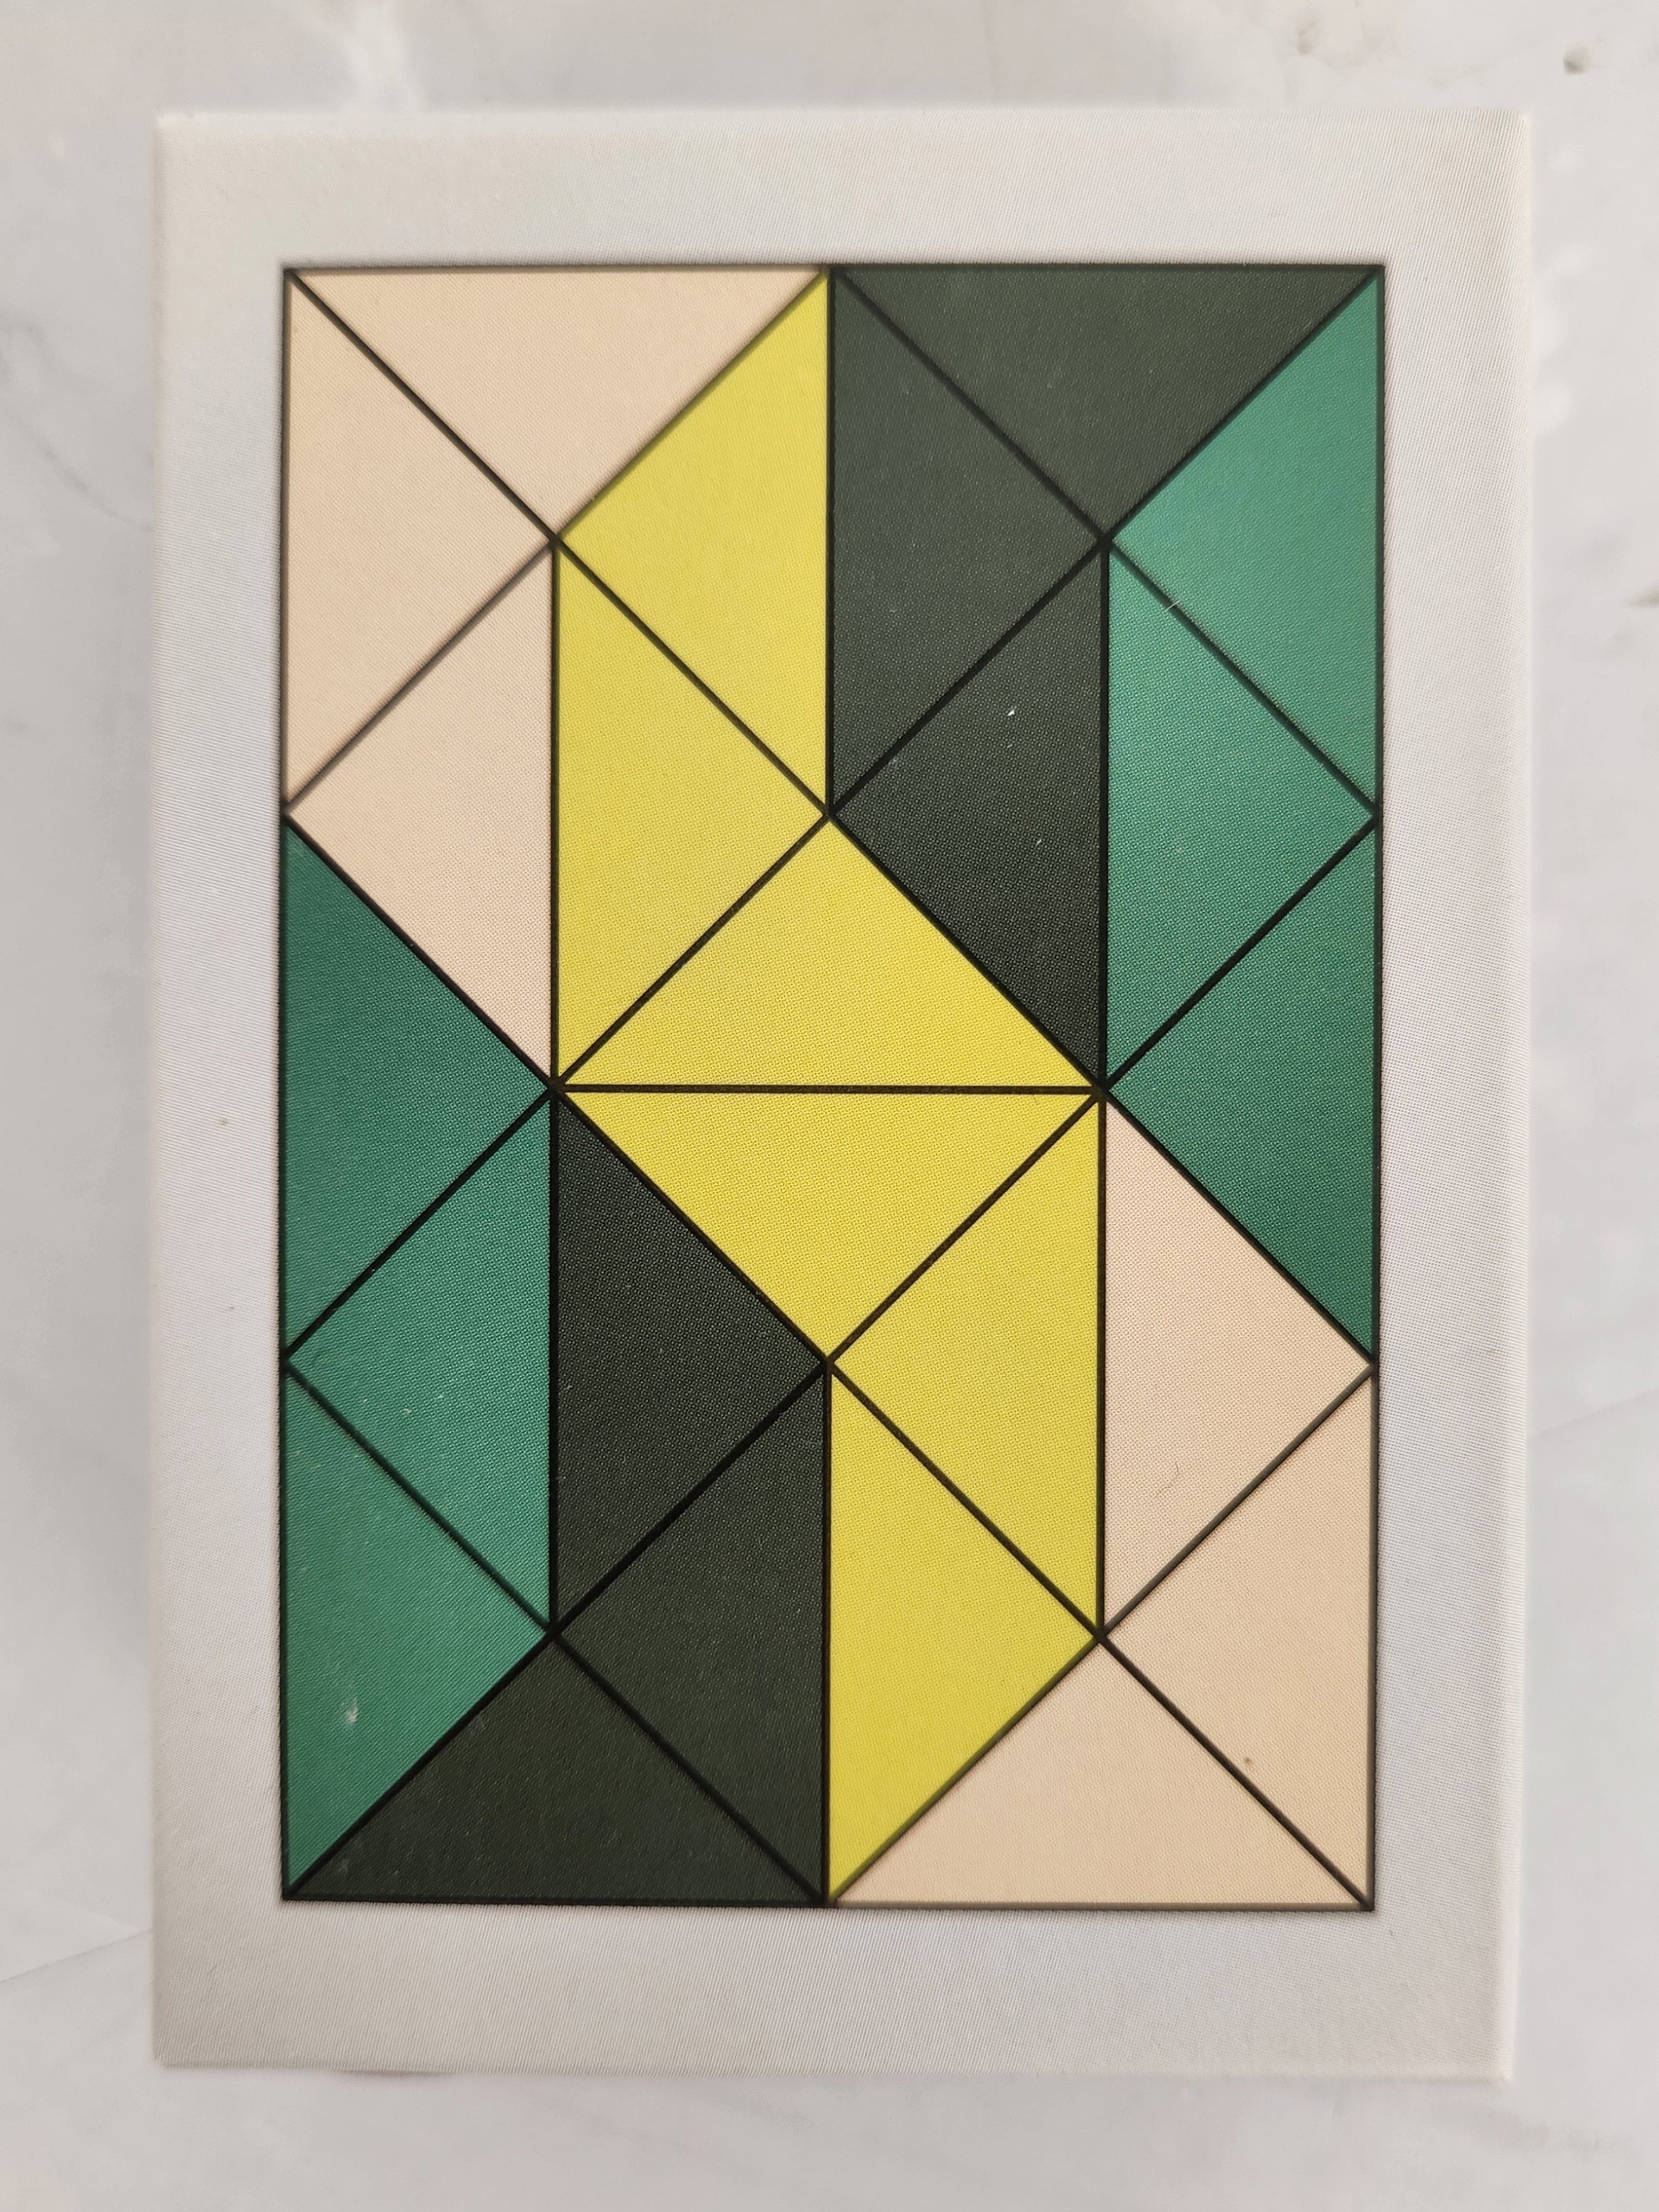 Areaware Small Snake Block Puzzle Yellow/Green